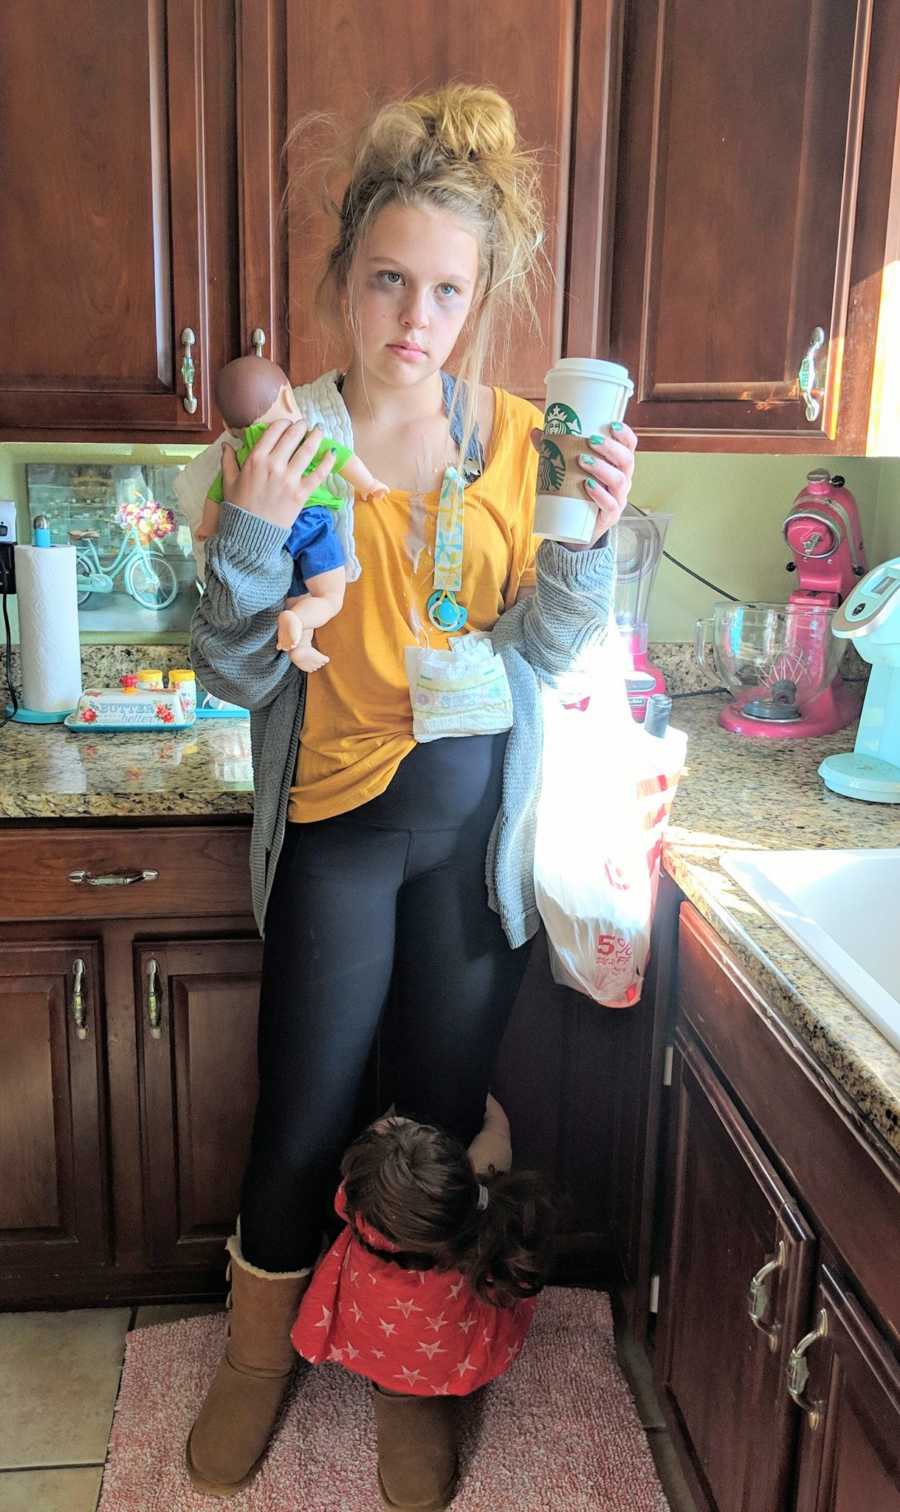 Teen dressed as "tired mom" stands in kitchen